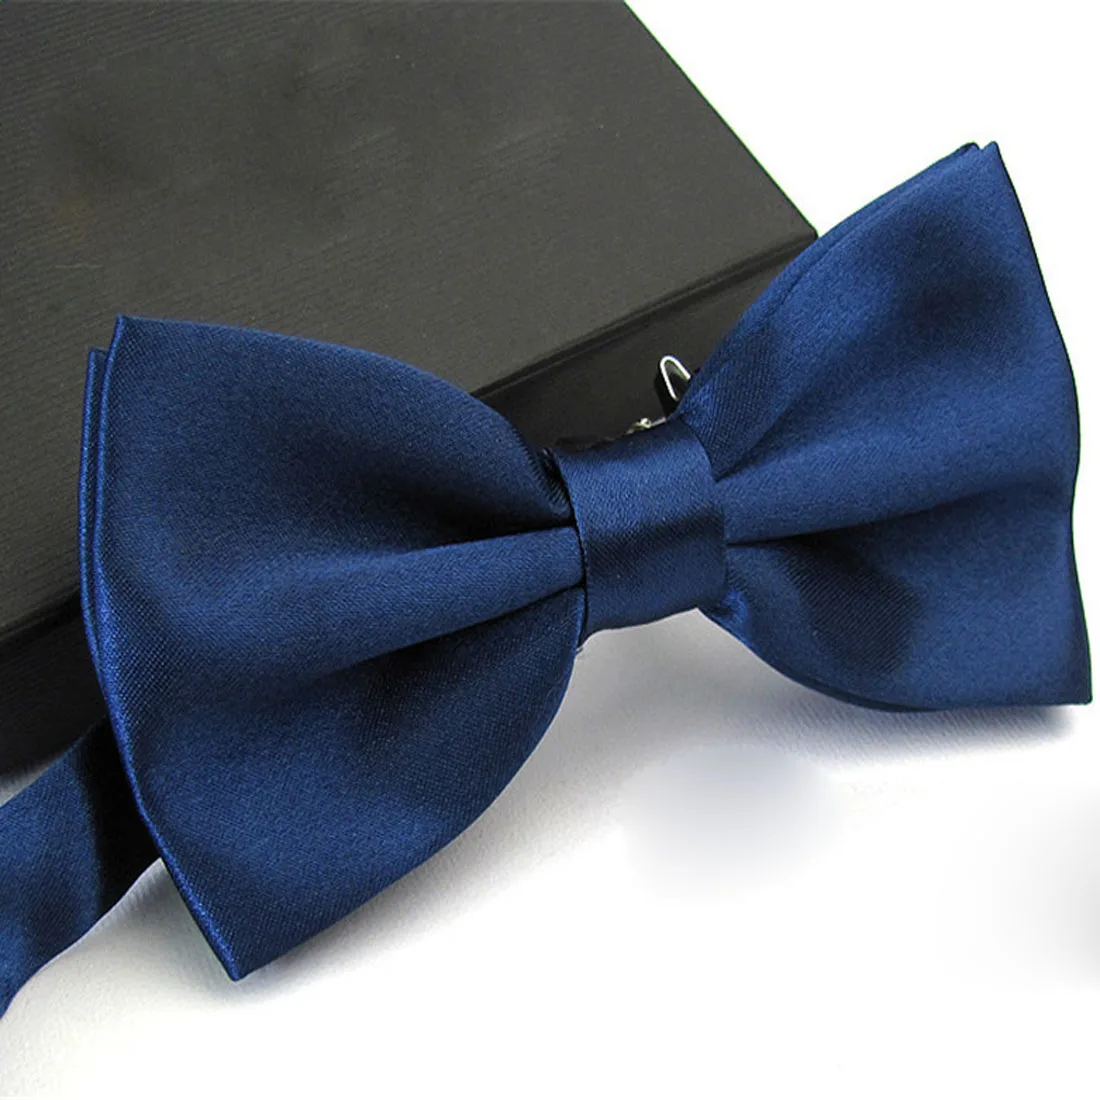 Hot Sale 1PC Gentleman Men Classic Satin Bowtie Necktie For Wedding Party Adjustable Male Butterfly Bow tie knot For Man Gifts - Цвет: 11